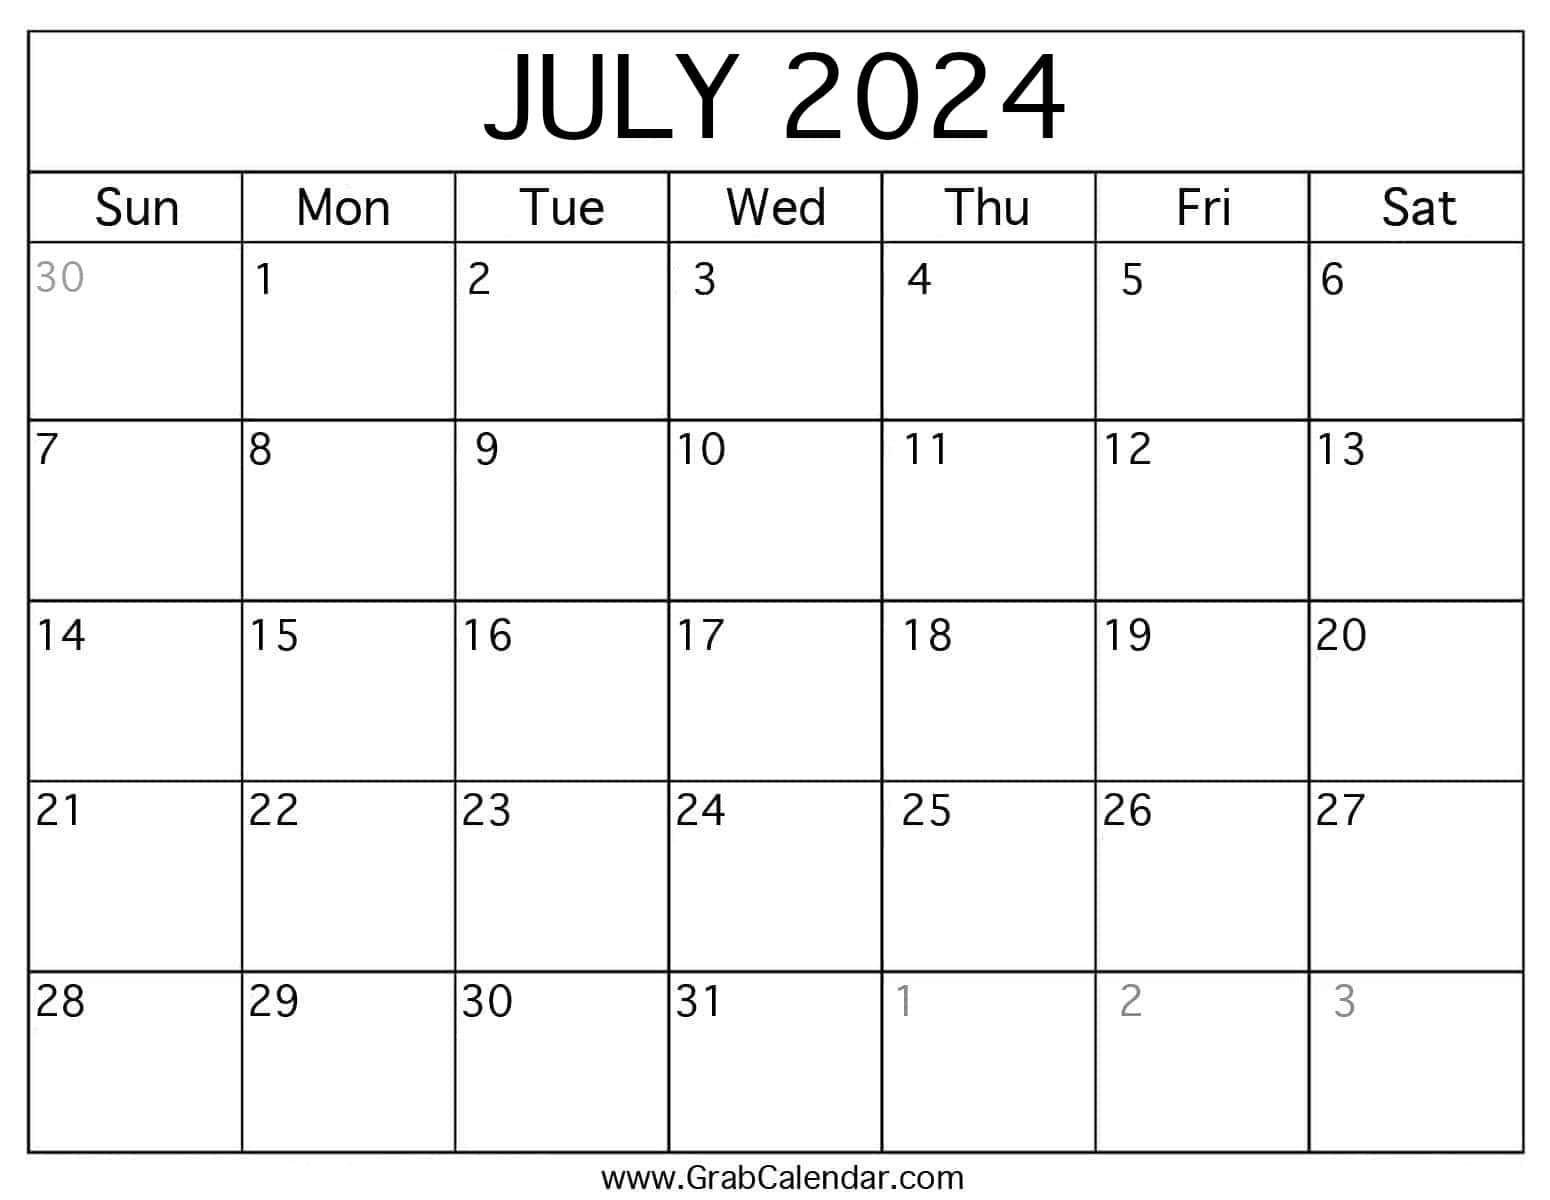 Printable July 2024 Calendar | Picture Of A Calendar For July 2024